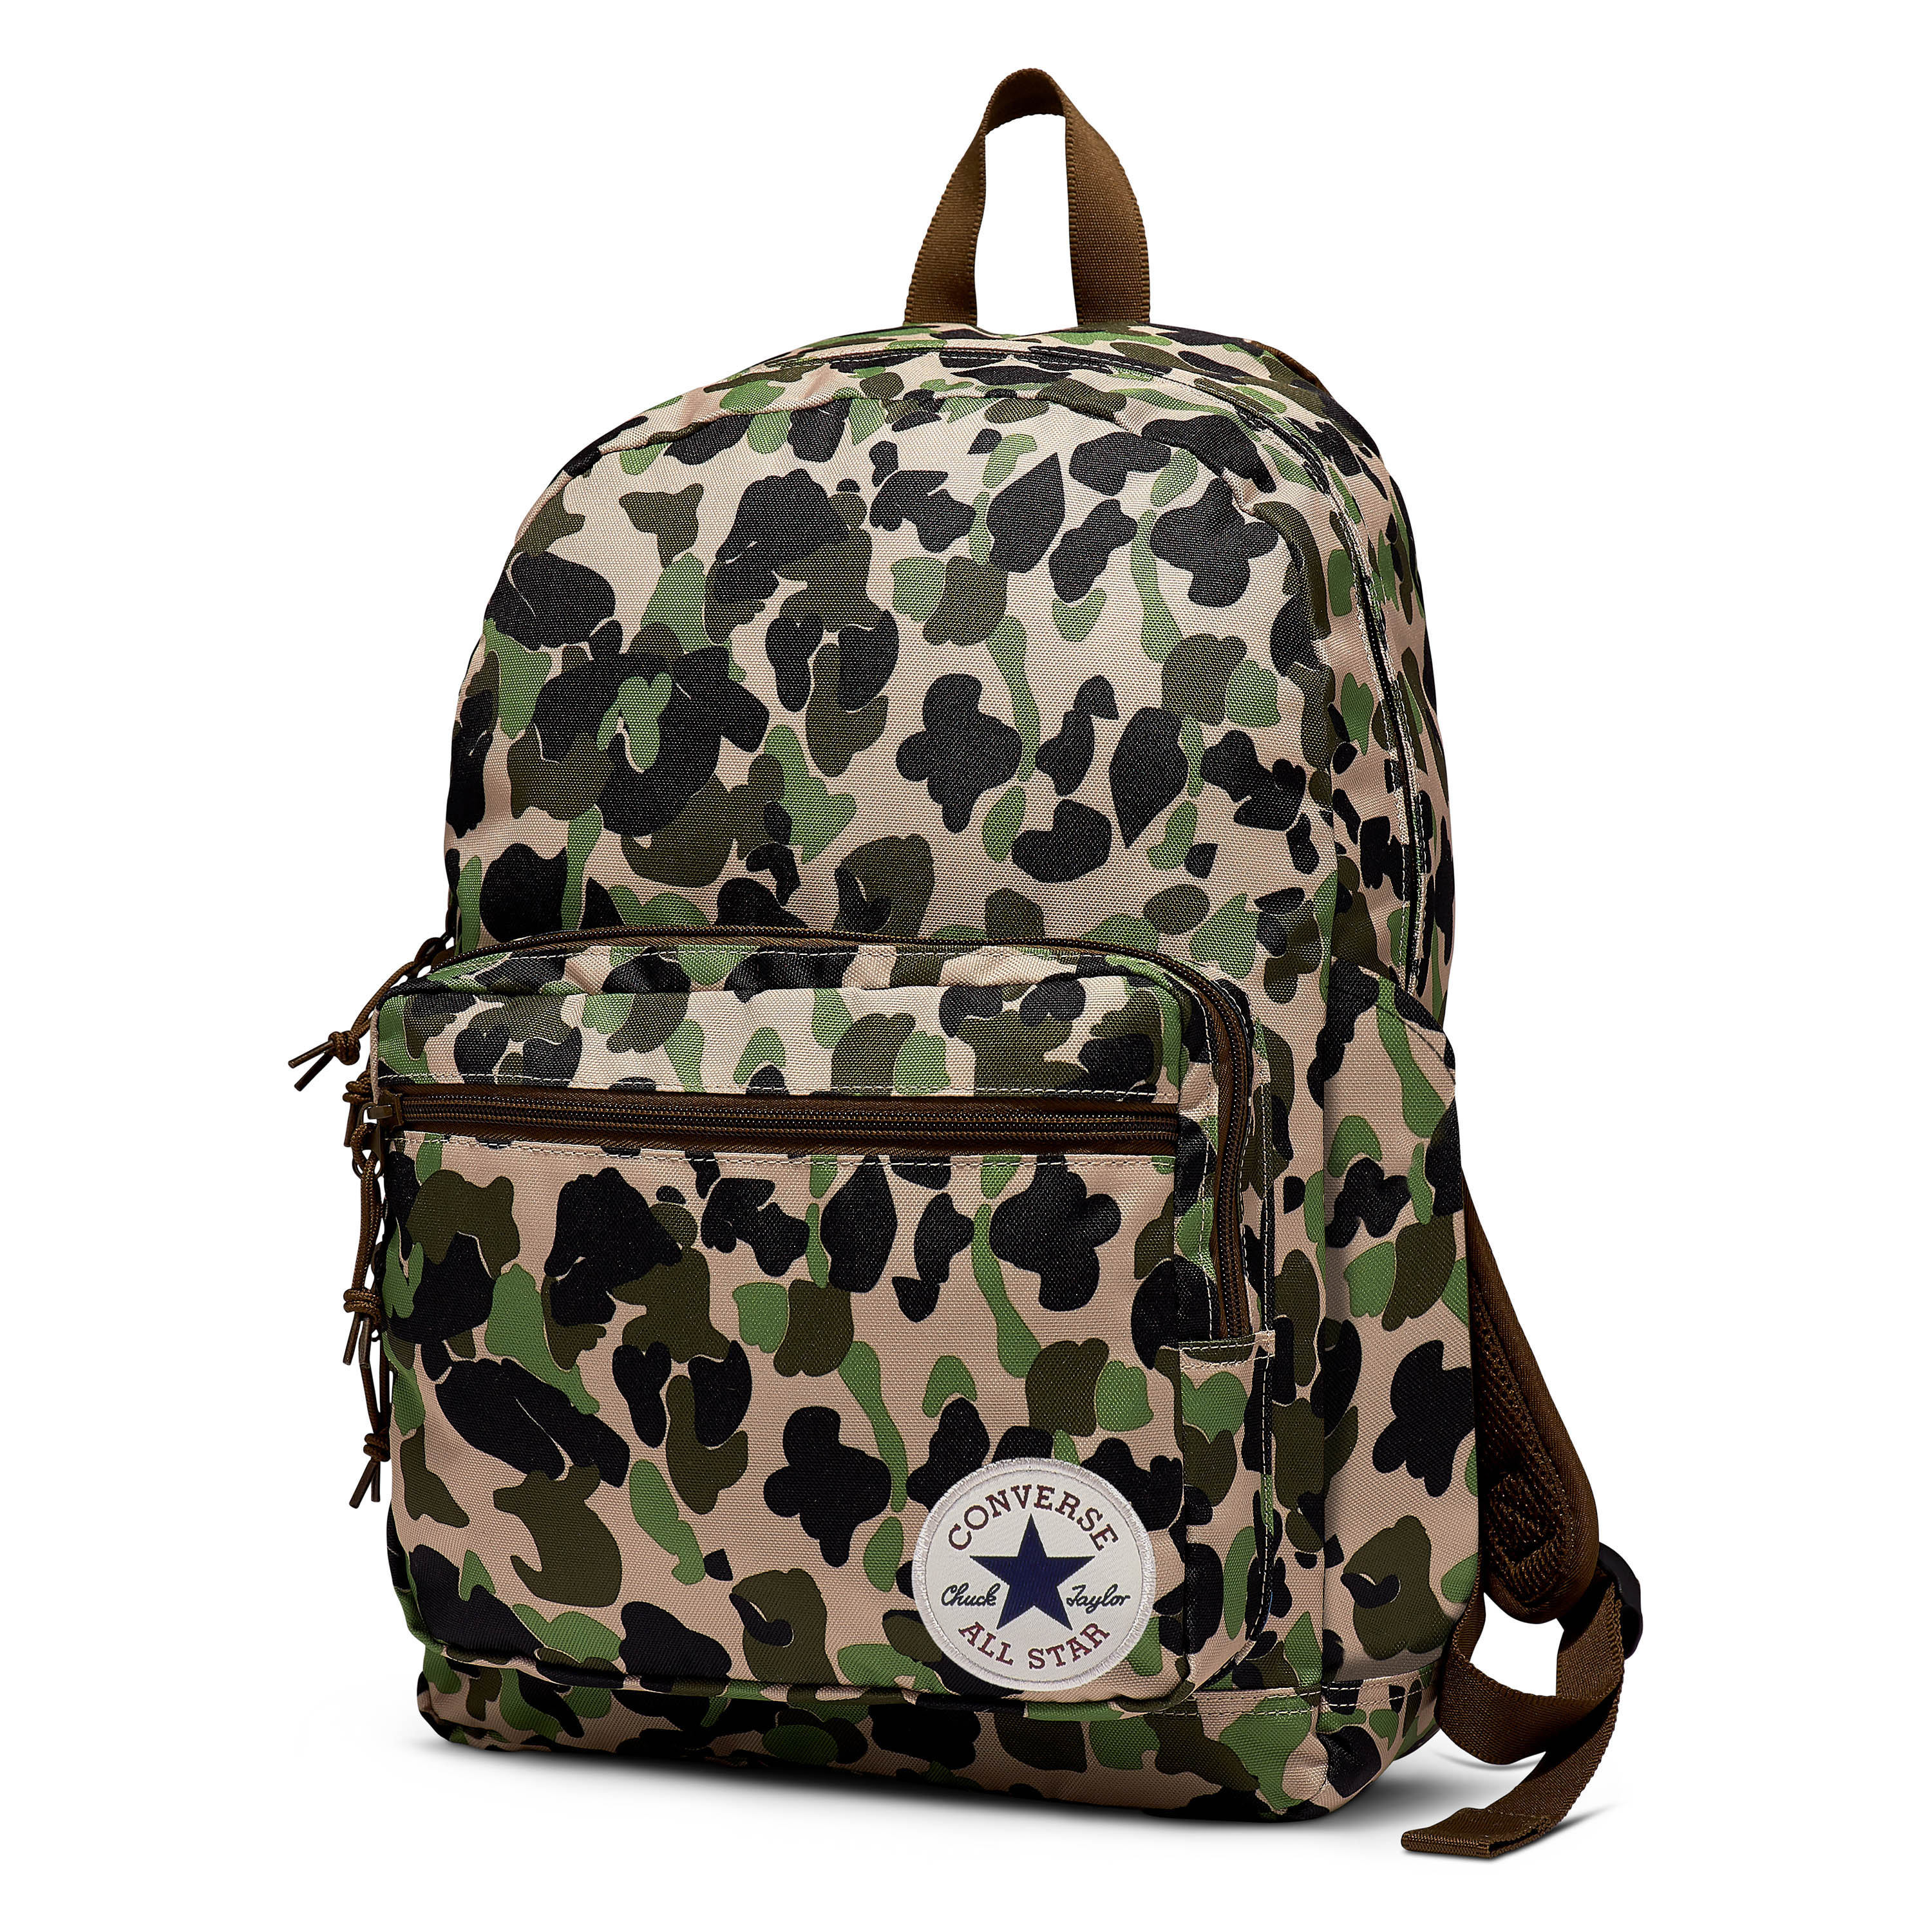 converse backpack online malaysia